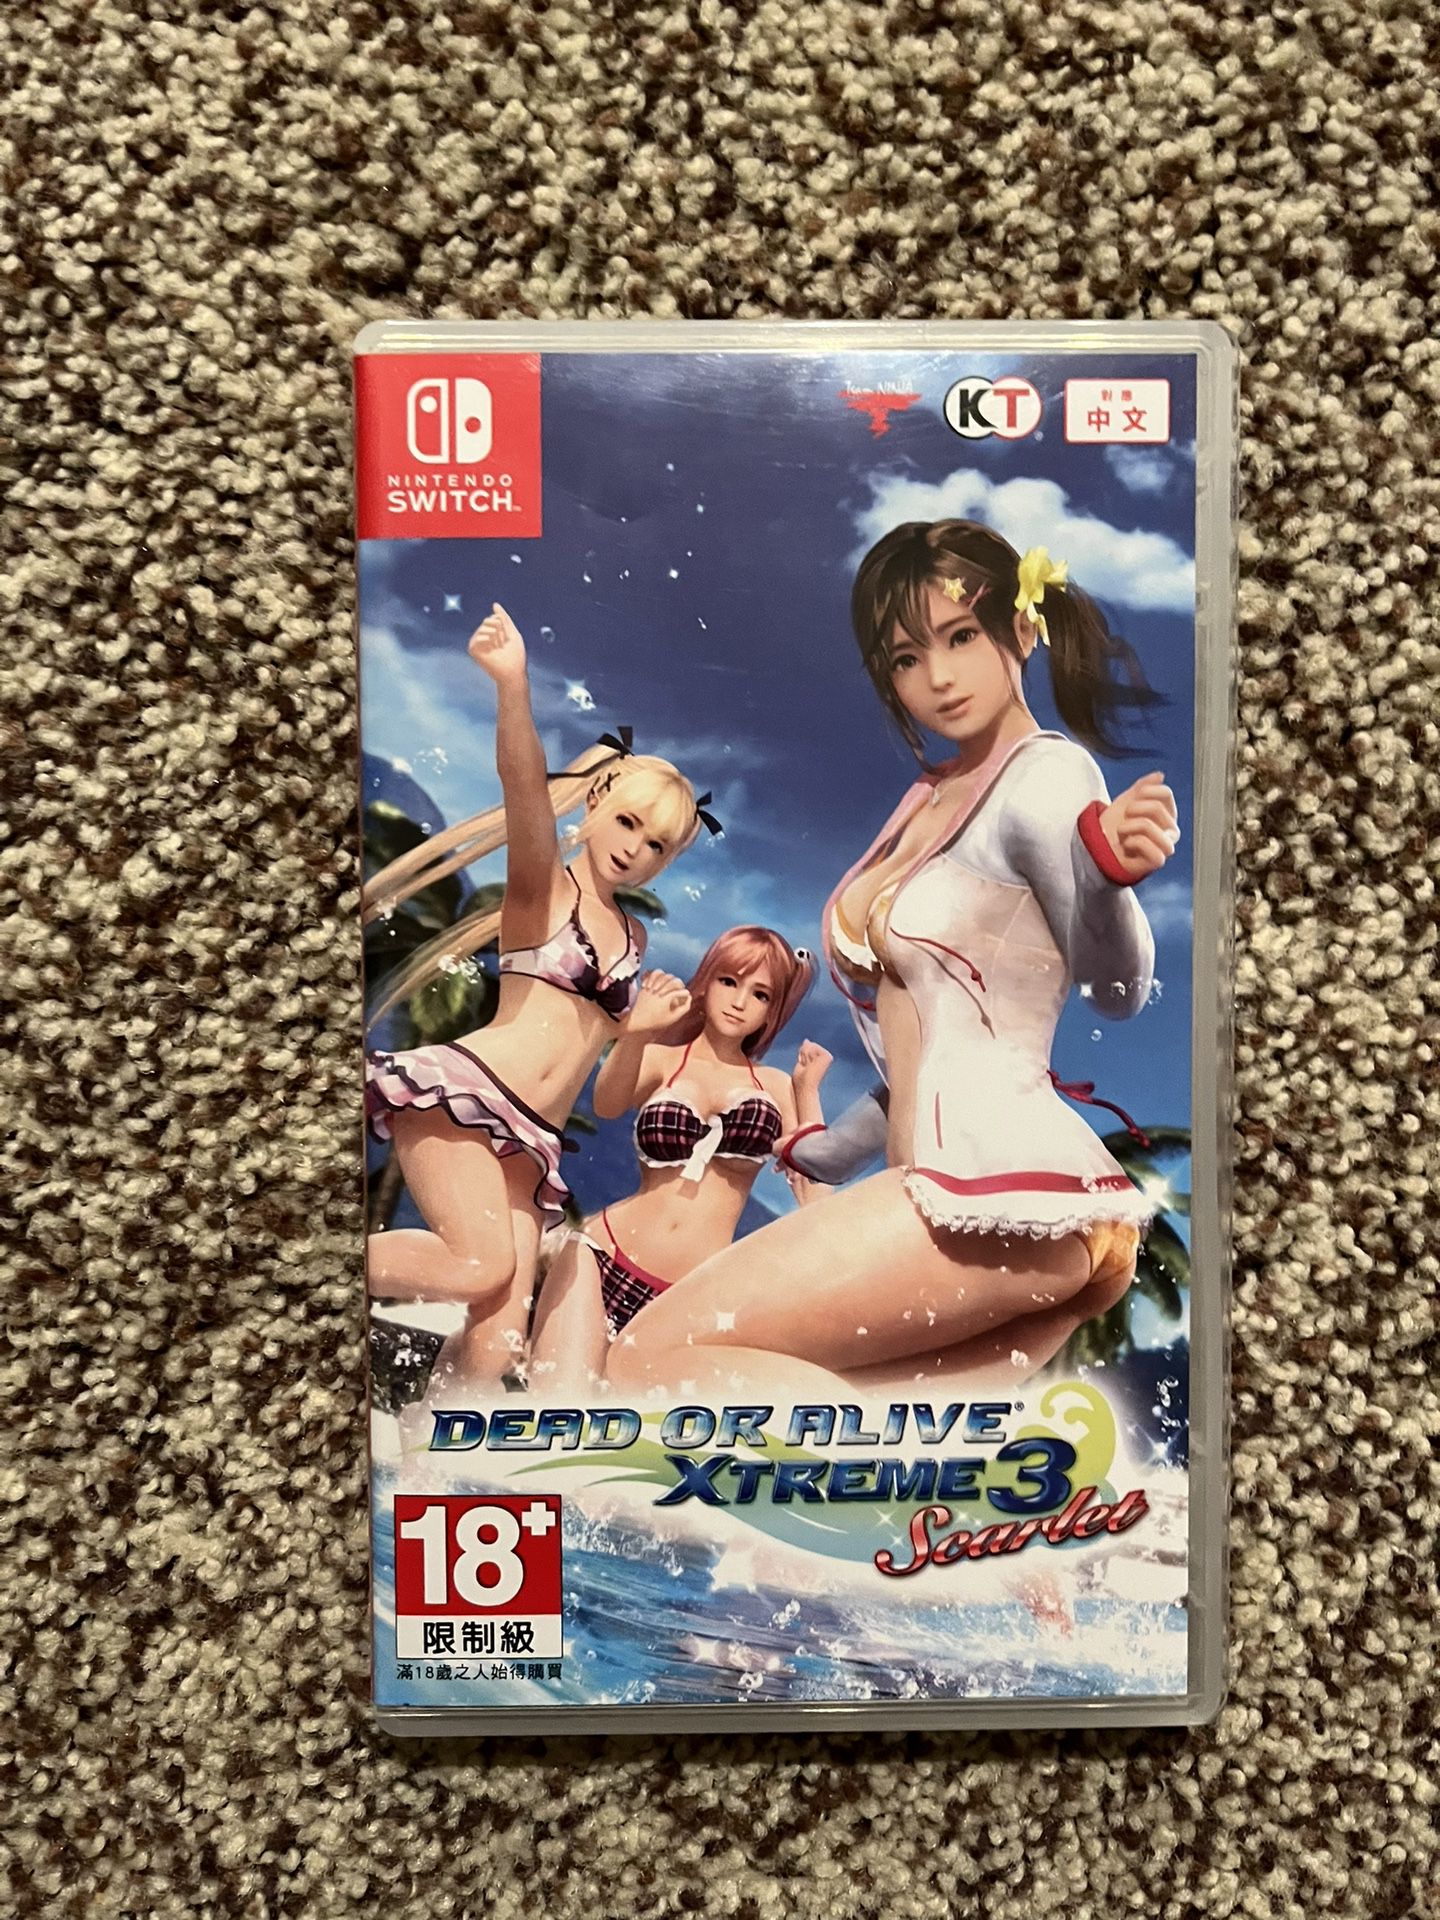 dead-or-alive-xtreme-3-scarlet-nintendo-switch-game-for-sale-in-snohomish-wa-offerup